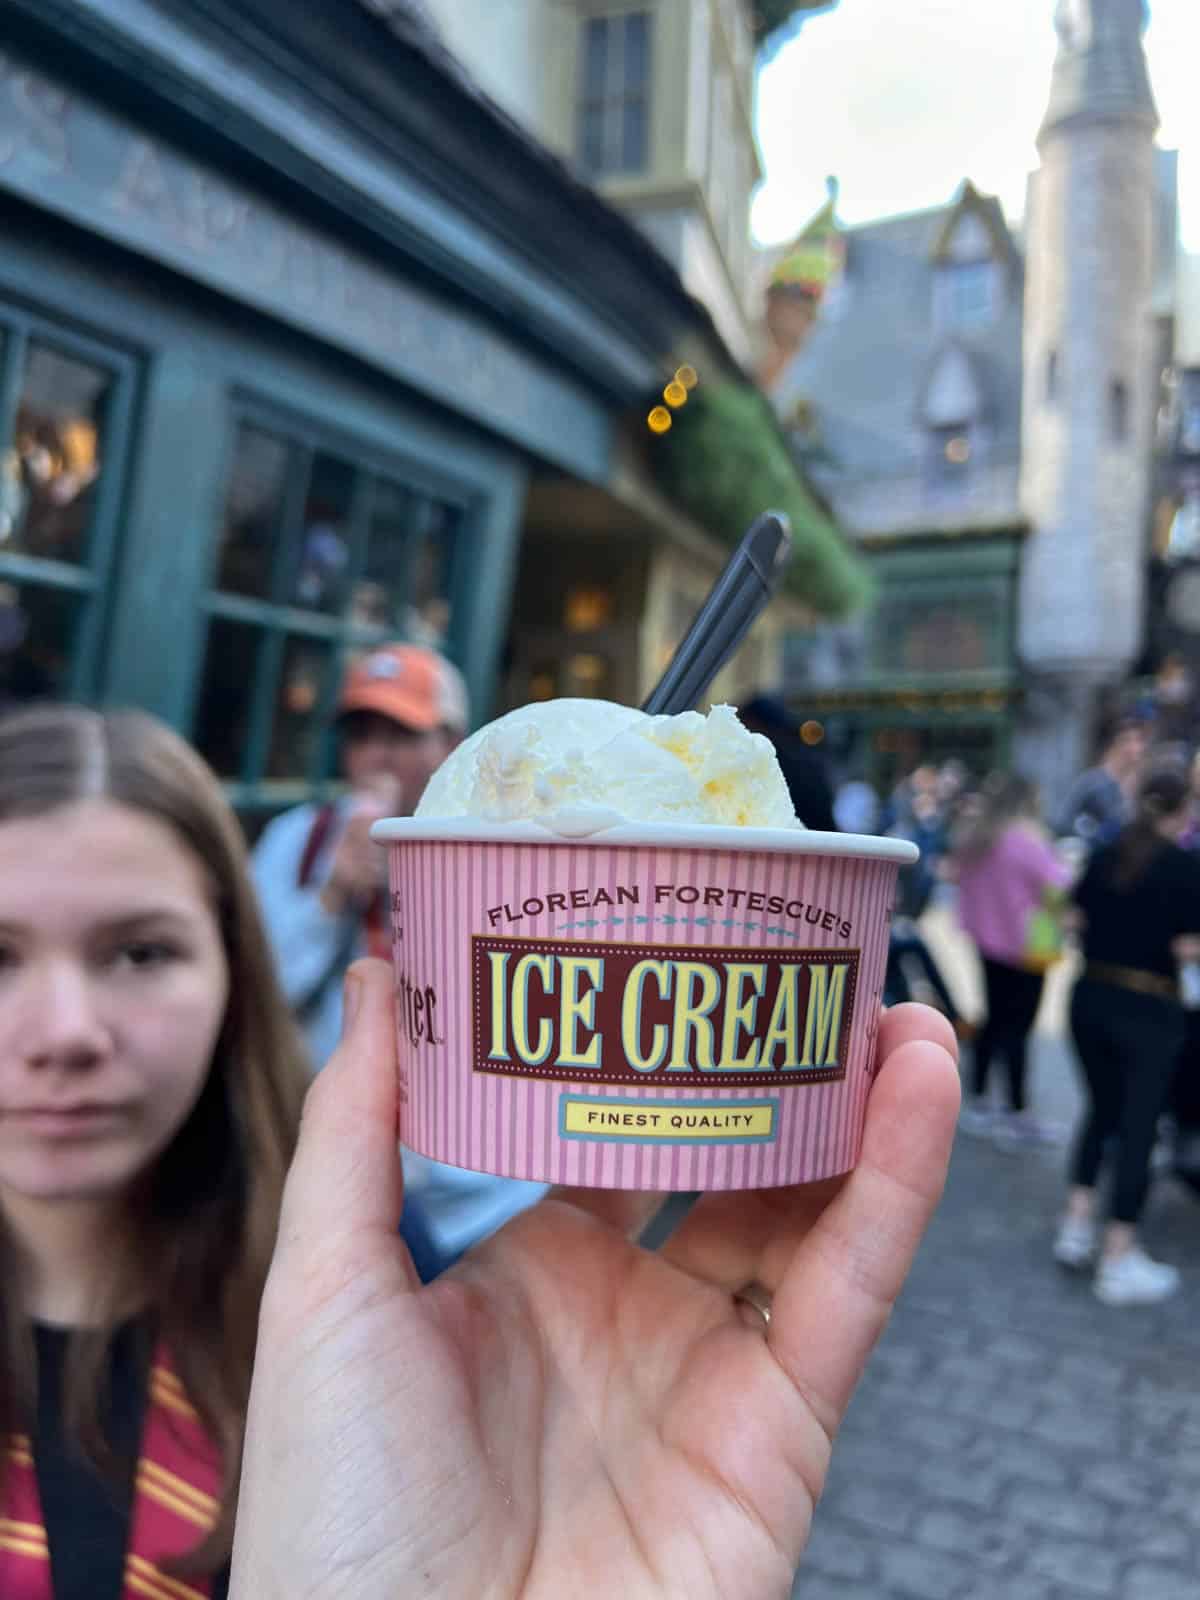 A cup of ice cream from Florean Fortescue's in Diagon Alley at the Wizarding World of Harry Potter.